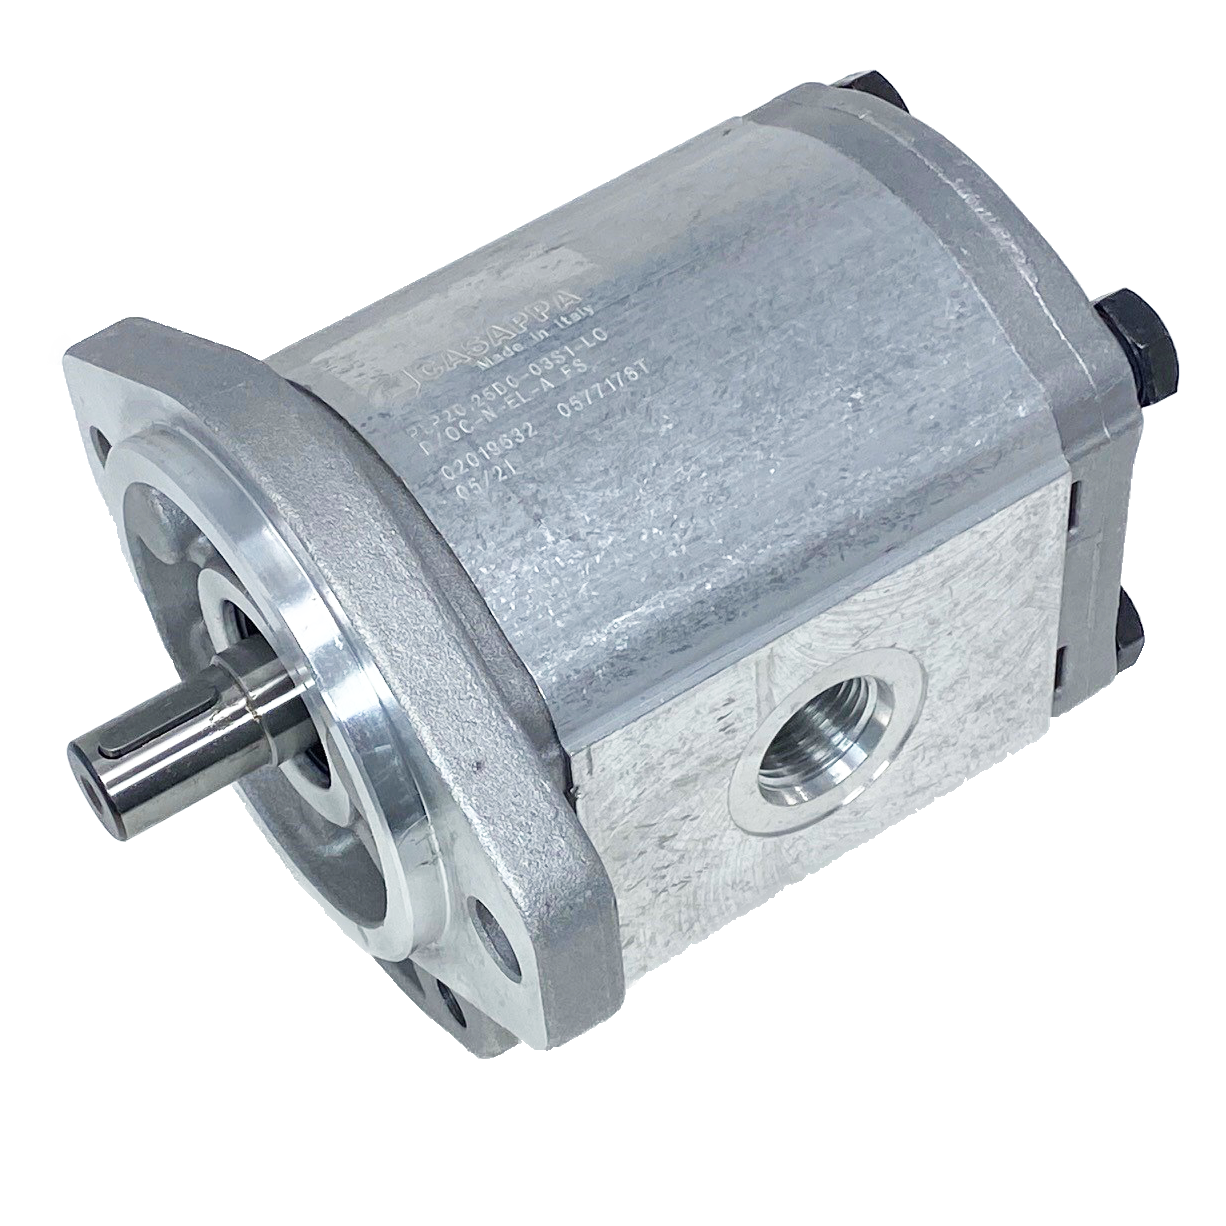 PHM20.25B0-31S9-LOC/OG-N-EL : Casappa Polaris Gear Motor, 26.42cc, 3335psi Rated, 3000RPM, Reversible Interior Drain, 5/8" Bore x 5/32" Key Shaft, SAE A 2-Bolt Flange, 0.625 (5/8") #10 SAE Inlet, 1.25" #20 SAE Outlet, Cast Iron Body, Aluminum Flange